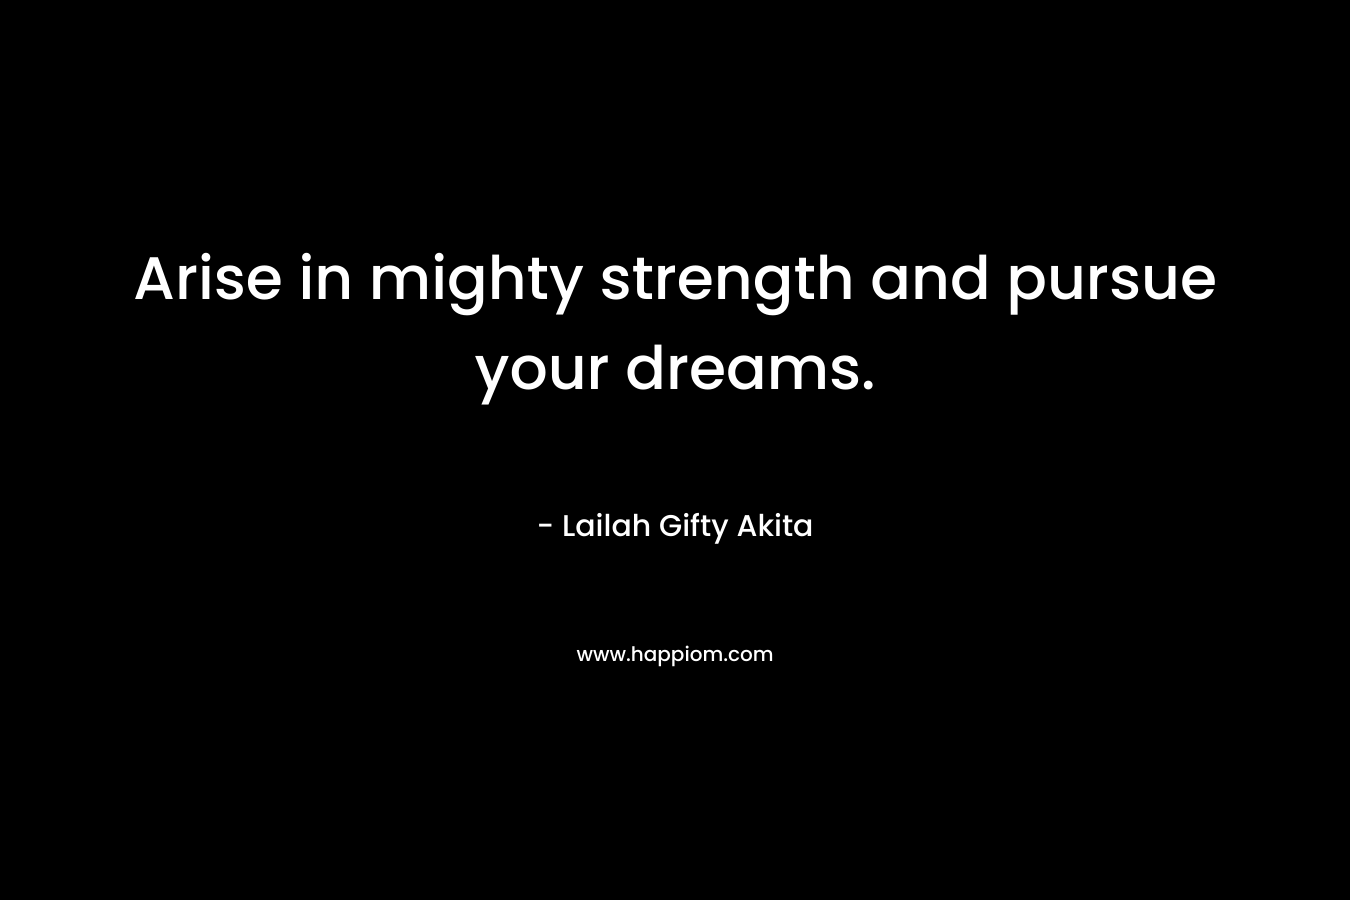 Arise in mighty strength and pursue your dreams.